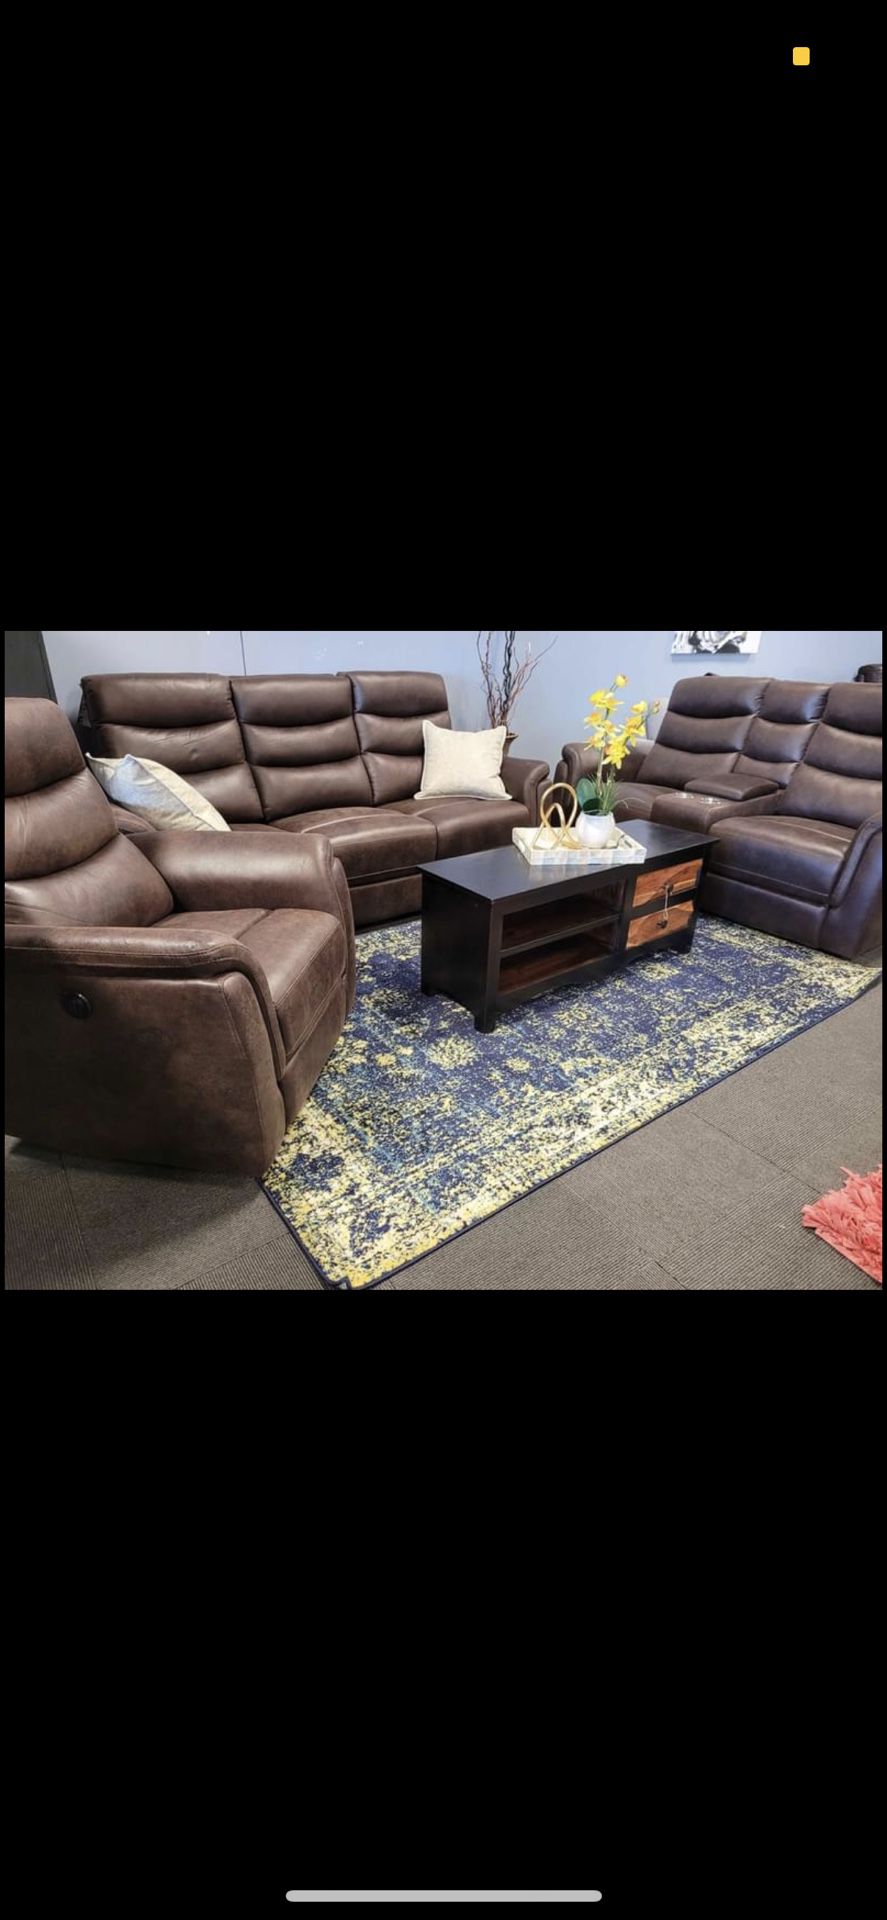 In stock now!! Brand new color - sofa/loveseat/recliner- buy as set or only the pieces you need -